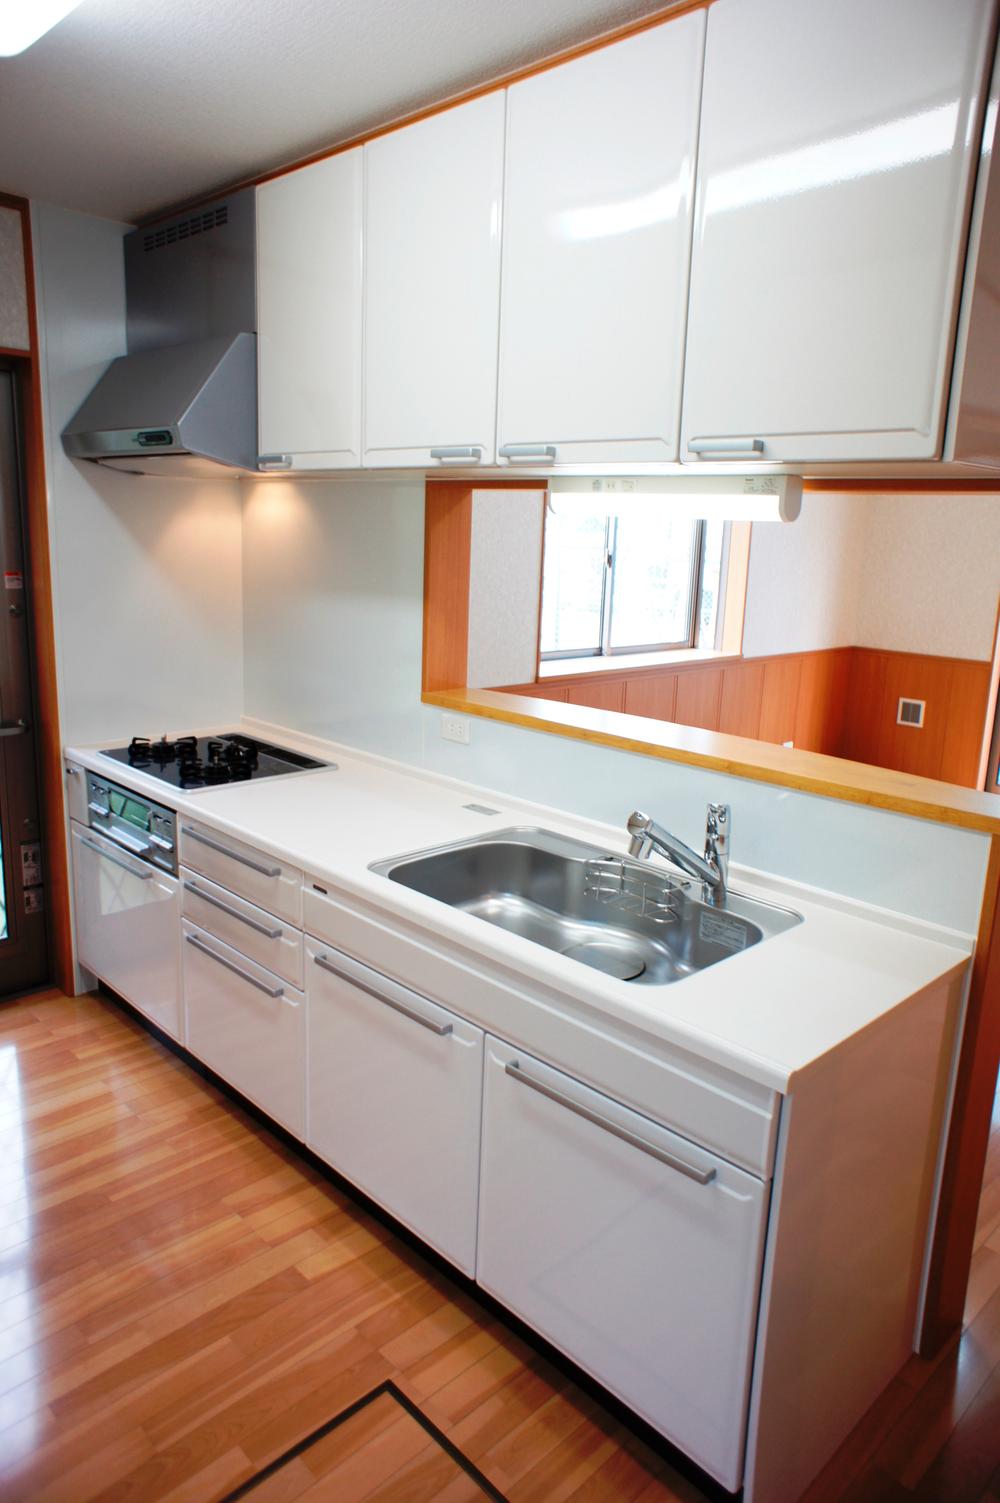 Compartment view + building plan example. Building plan example, Land price 18,550,000 yen, Land area 150 sq m , Building price 13,950,000 yen, Building area 102.68 sq m same specification construction cases Bright and clean enamel-made system kitchen is clean breeze! 